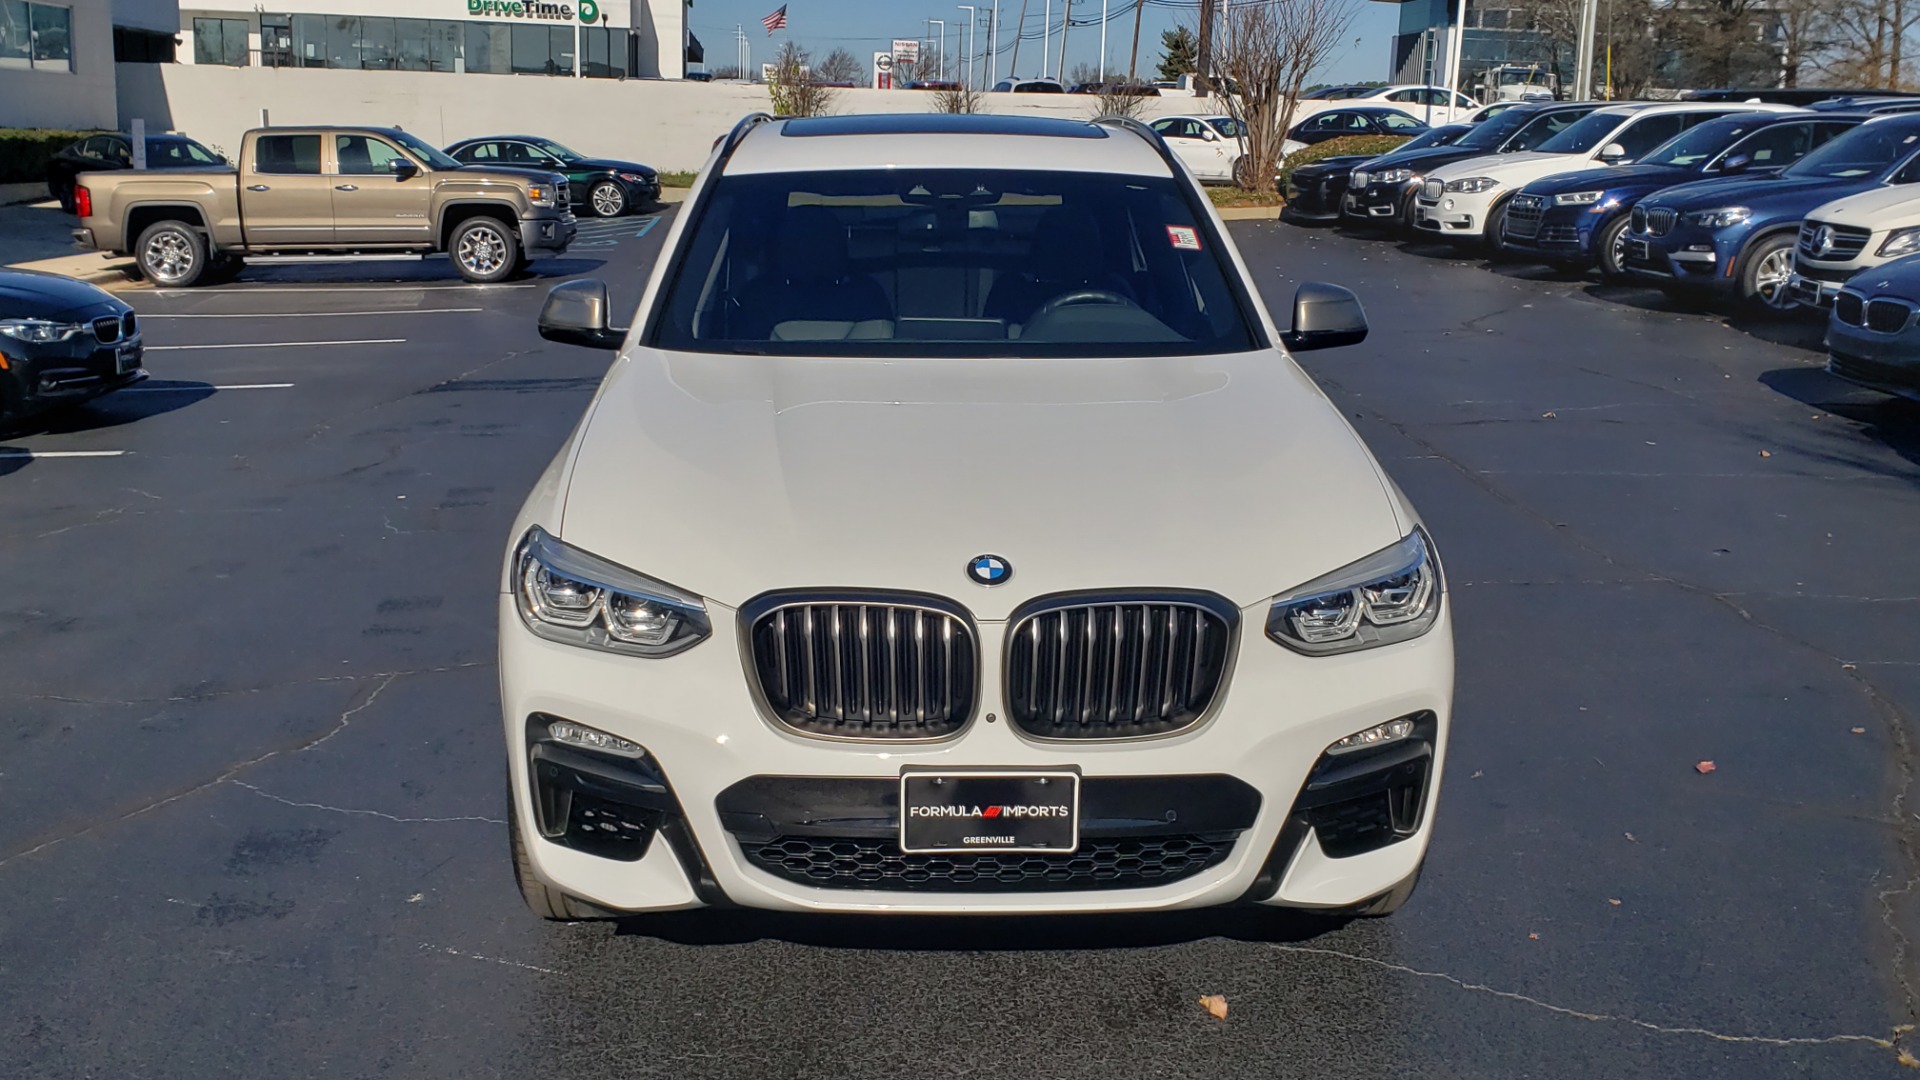 Used 2019 BMW X3 M40I SPORT / NAV / SUNROOF / DRVR ASST / PARK ASST / HTD STS / REARVIEW for sale $53,495 at Formula Imports in Charlotte NC 28227 22